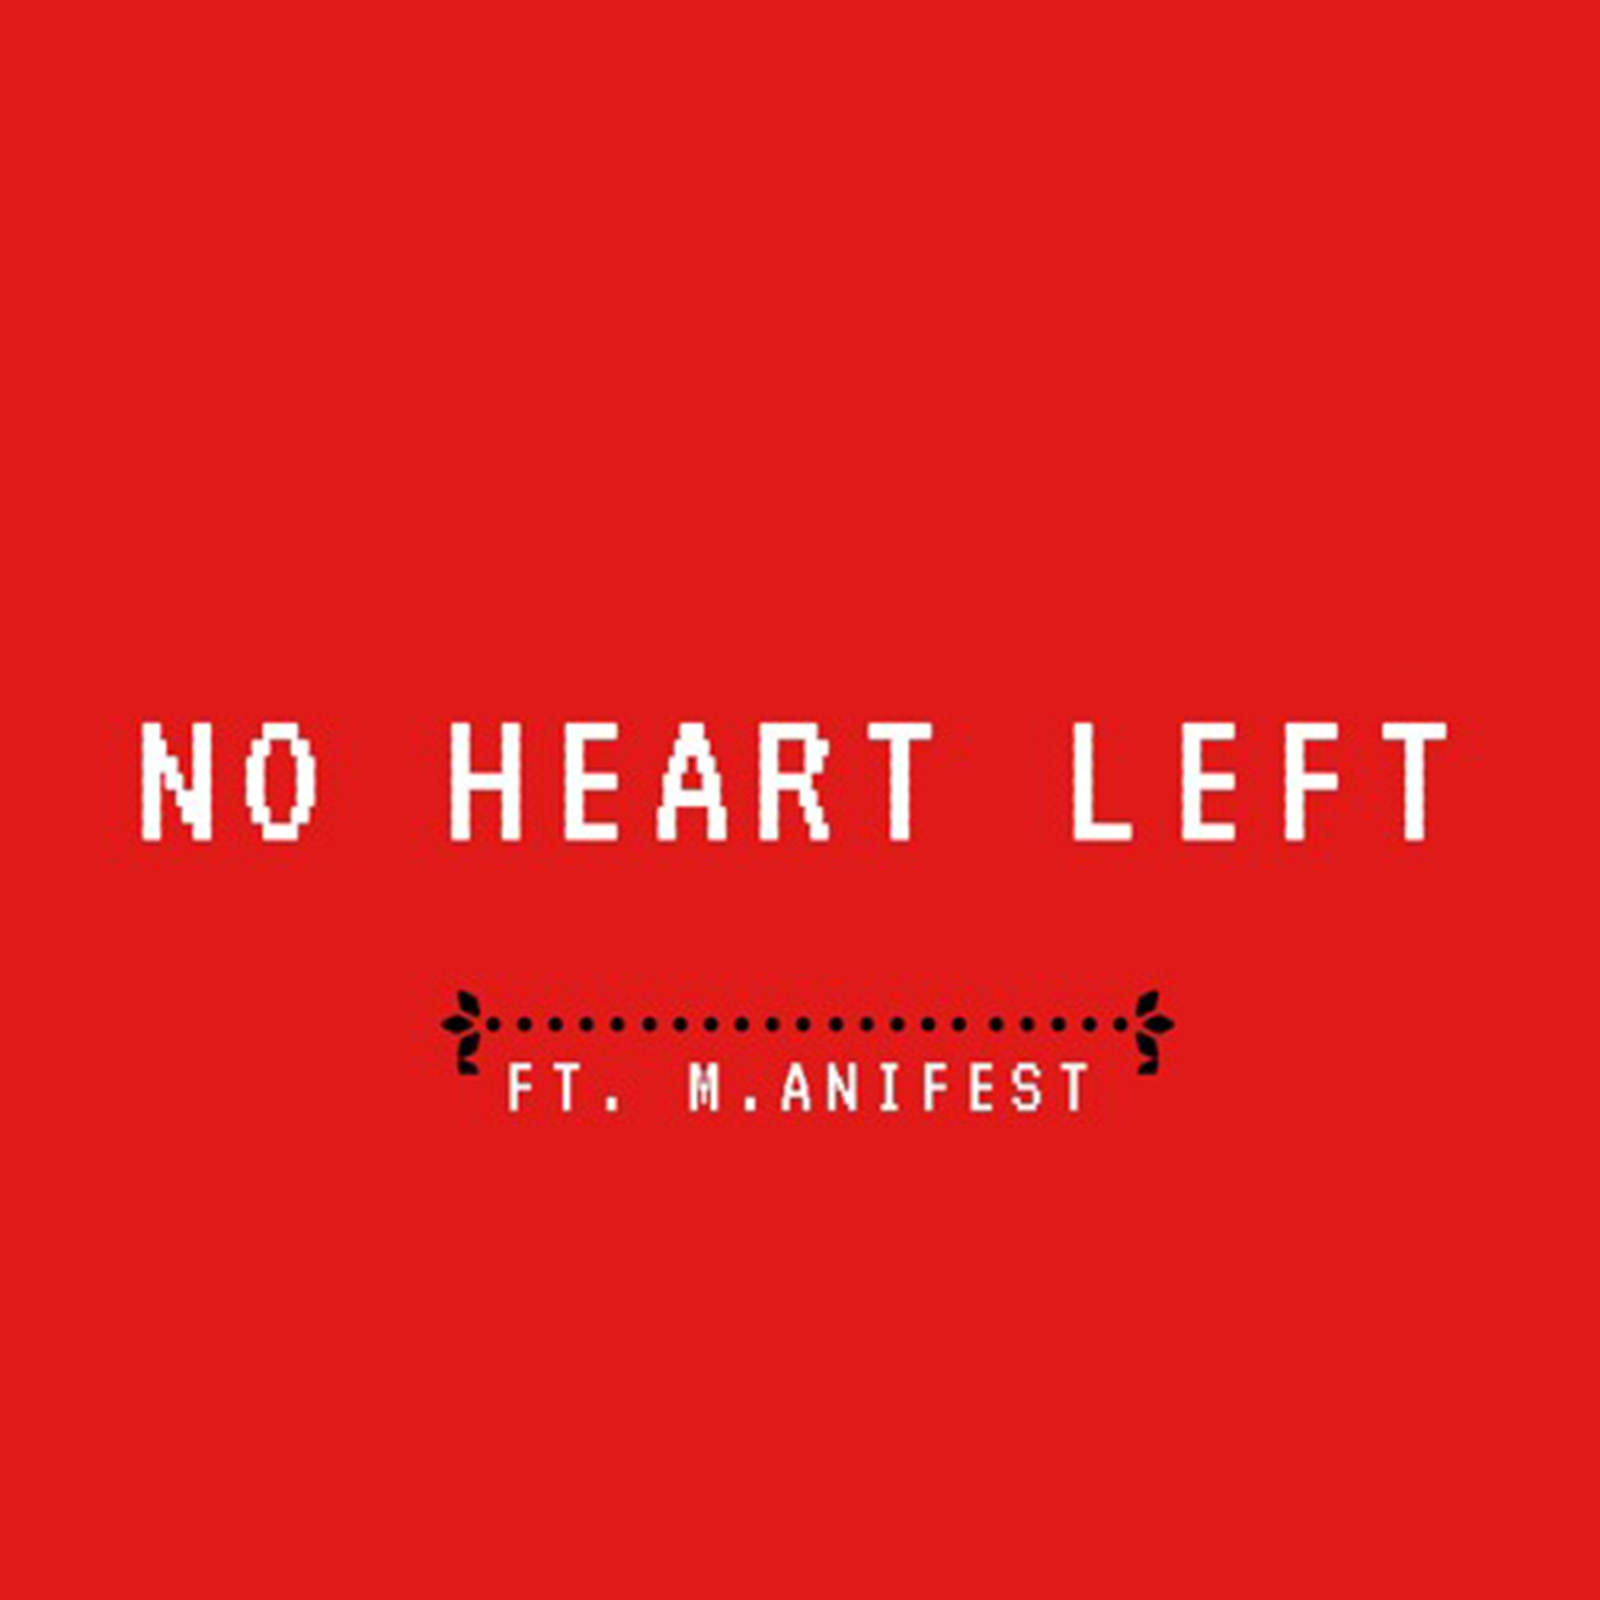 No Heart Left by Paapa feat. M.anifest